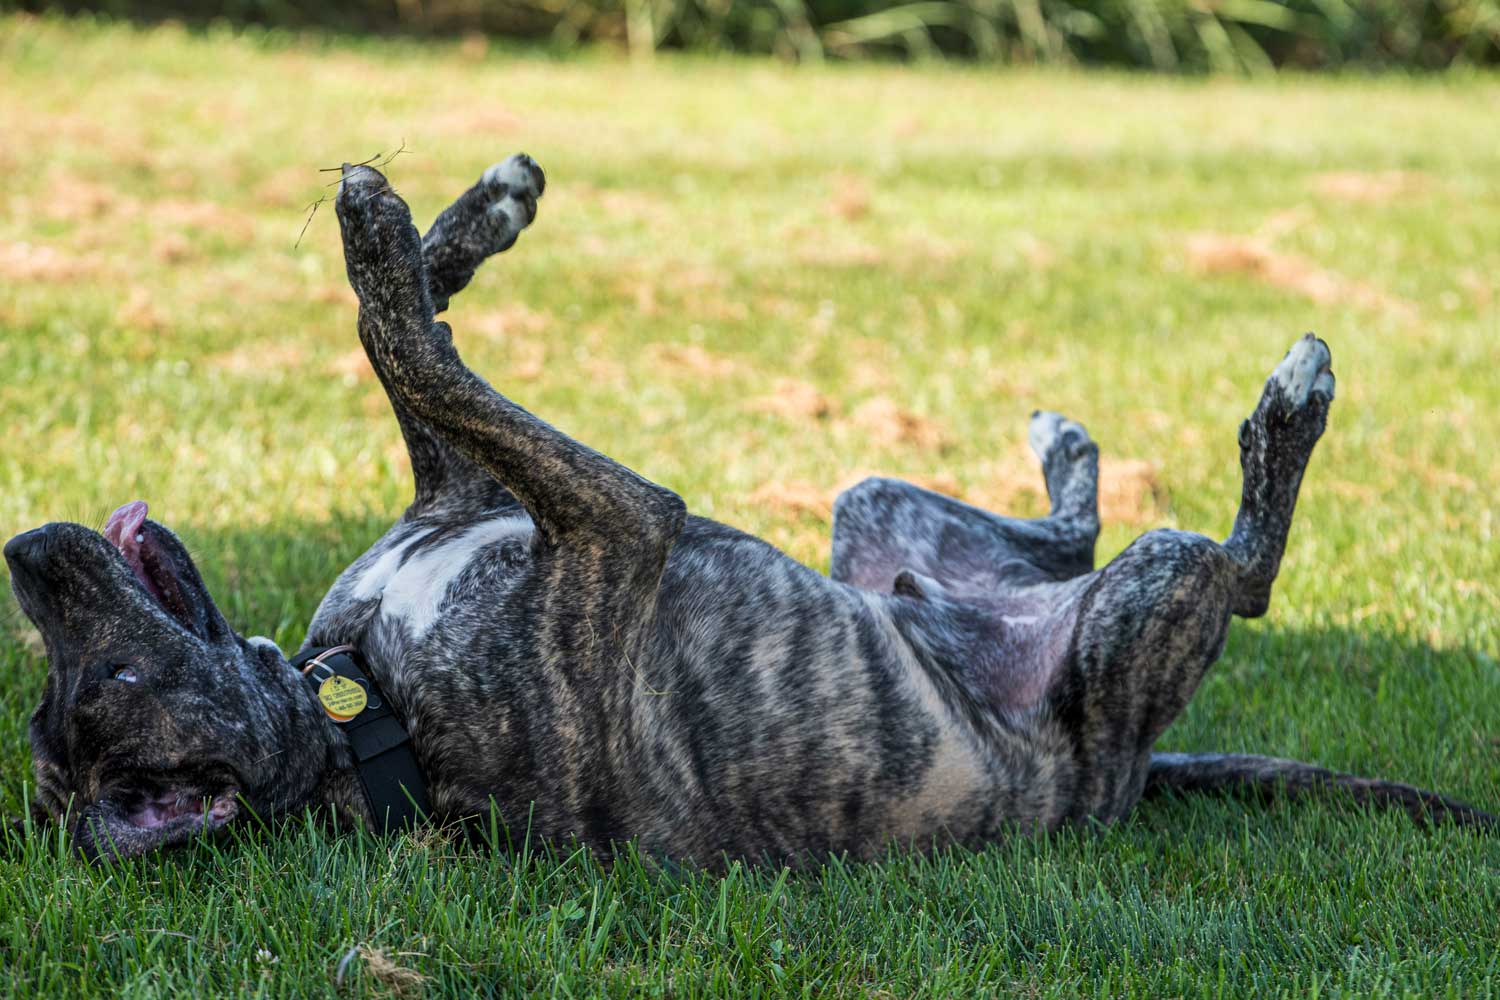 A dog rolling in the grass.